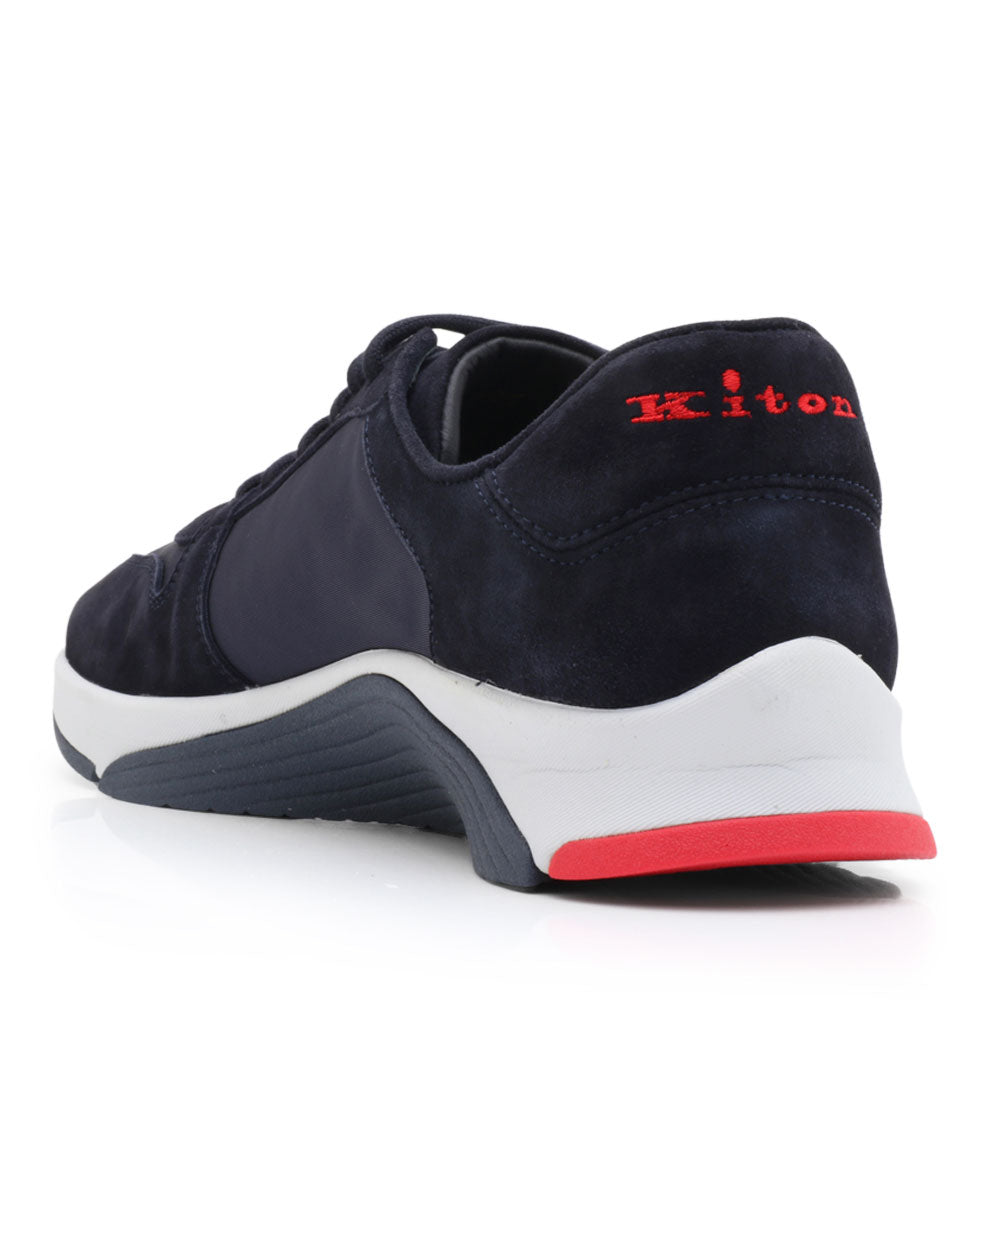 Nylon and Suede Sneaker in Navy